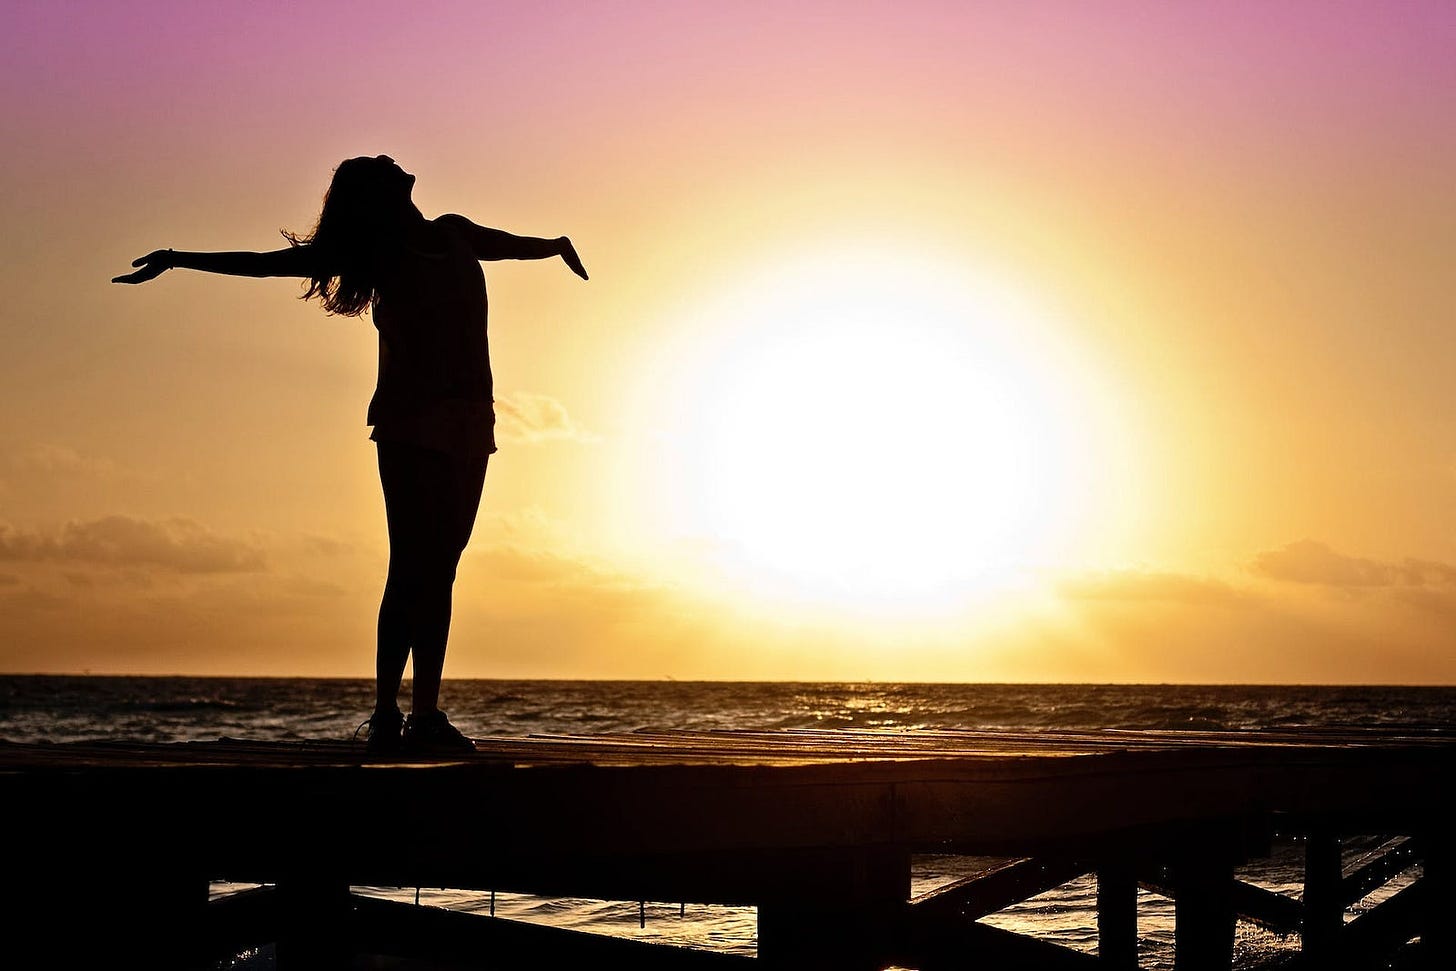 Sillhouette of a young woman happy and with outstretched arms at sunrise or sunset. She has flowing long hair and with her head tilted back and eyes towards the sky.